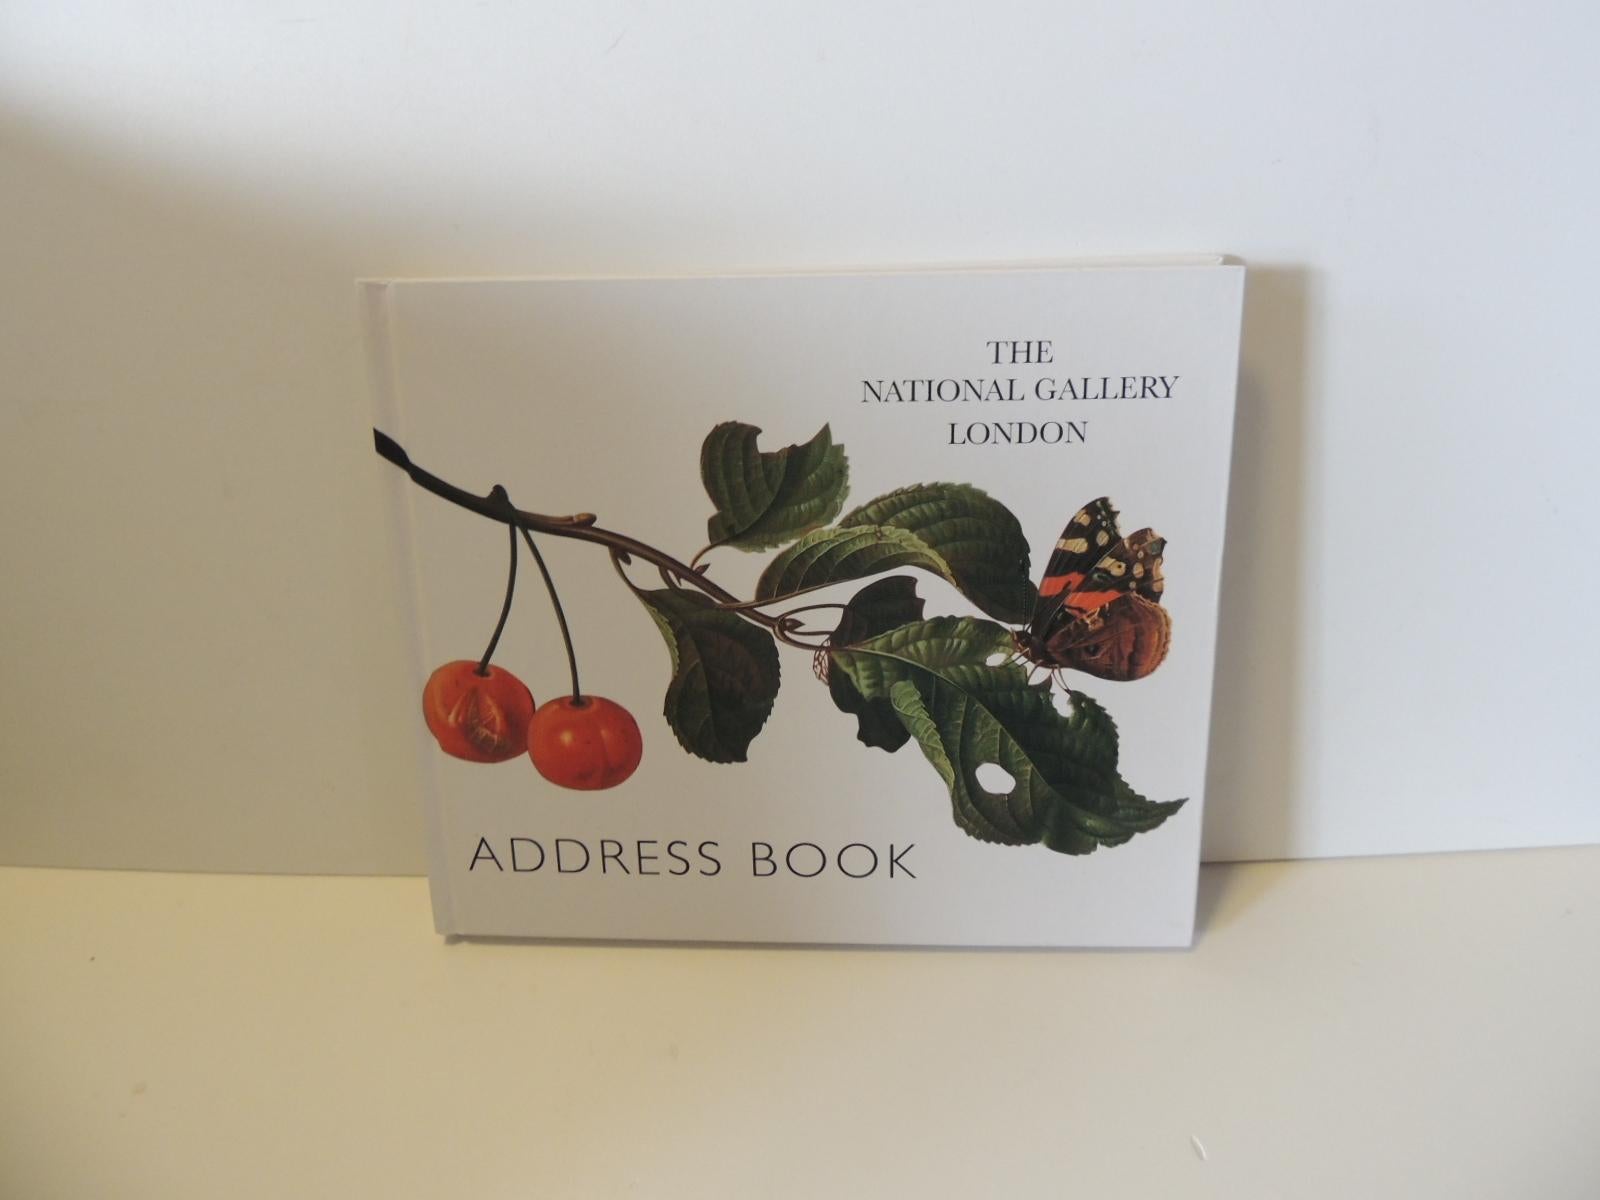 Vintage Address Book from The National Gallery of London.
Size: 9.5